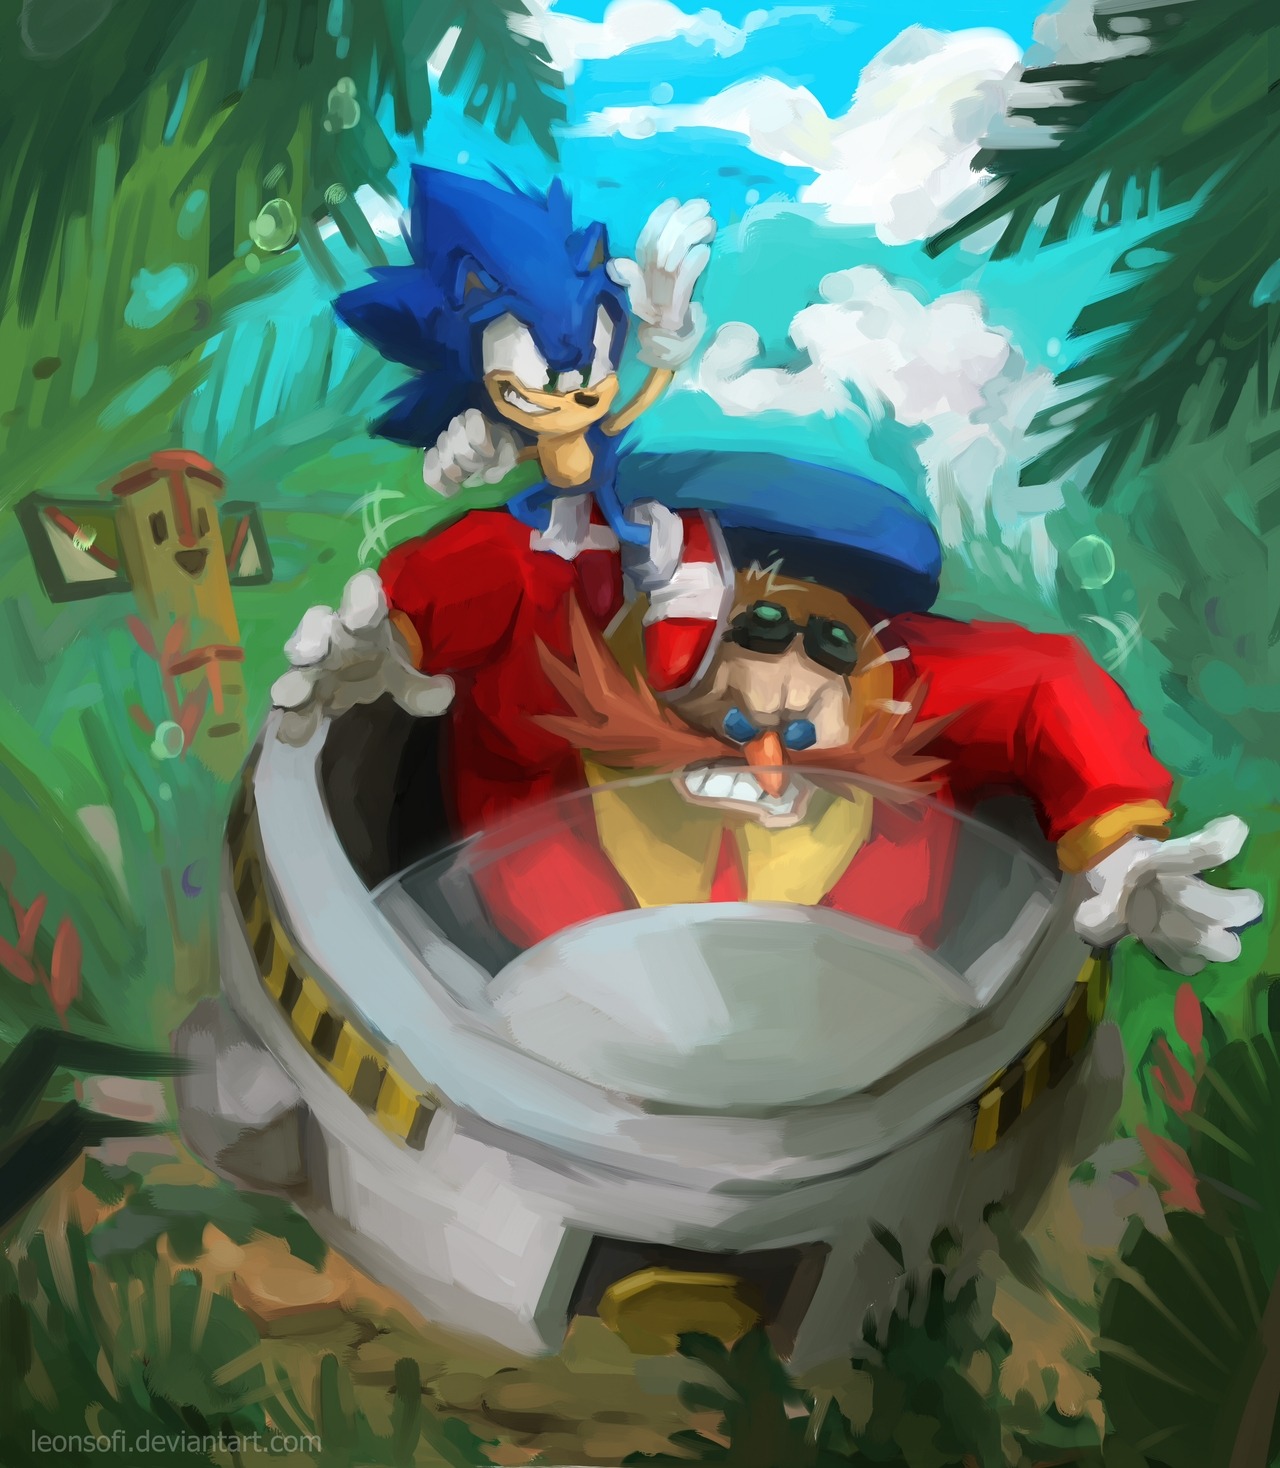 sonic, tails and amy rose in attack of titan : r/weirddalle